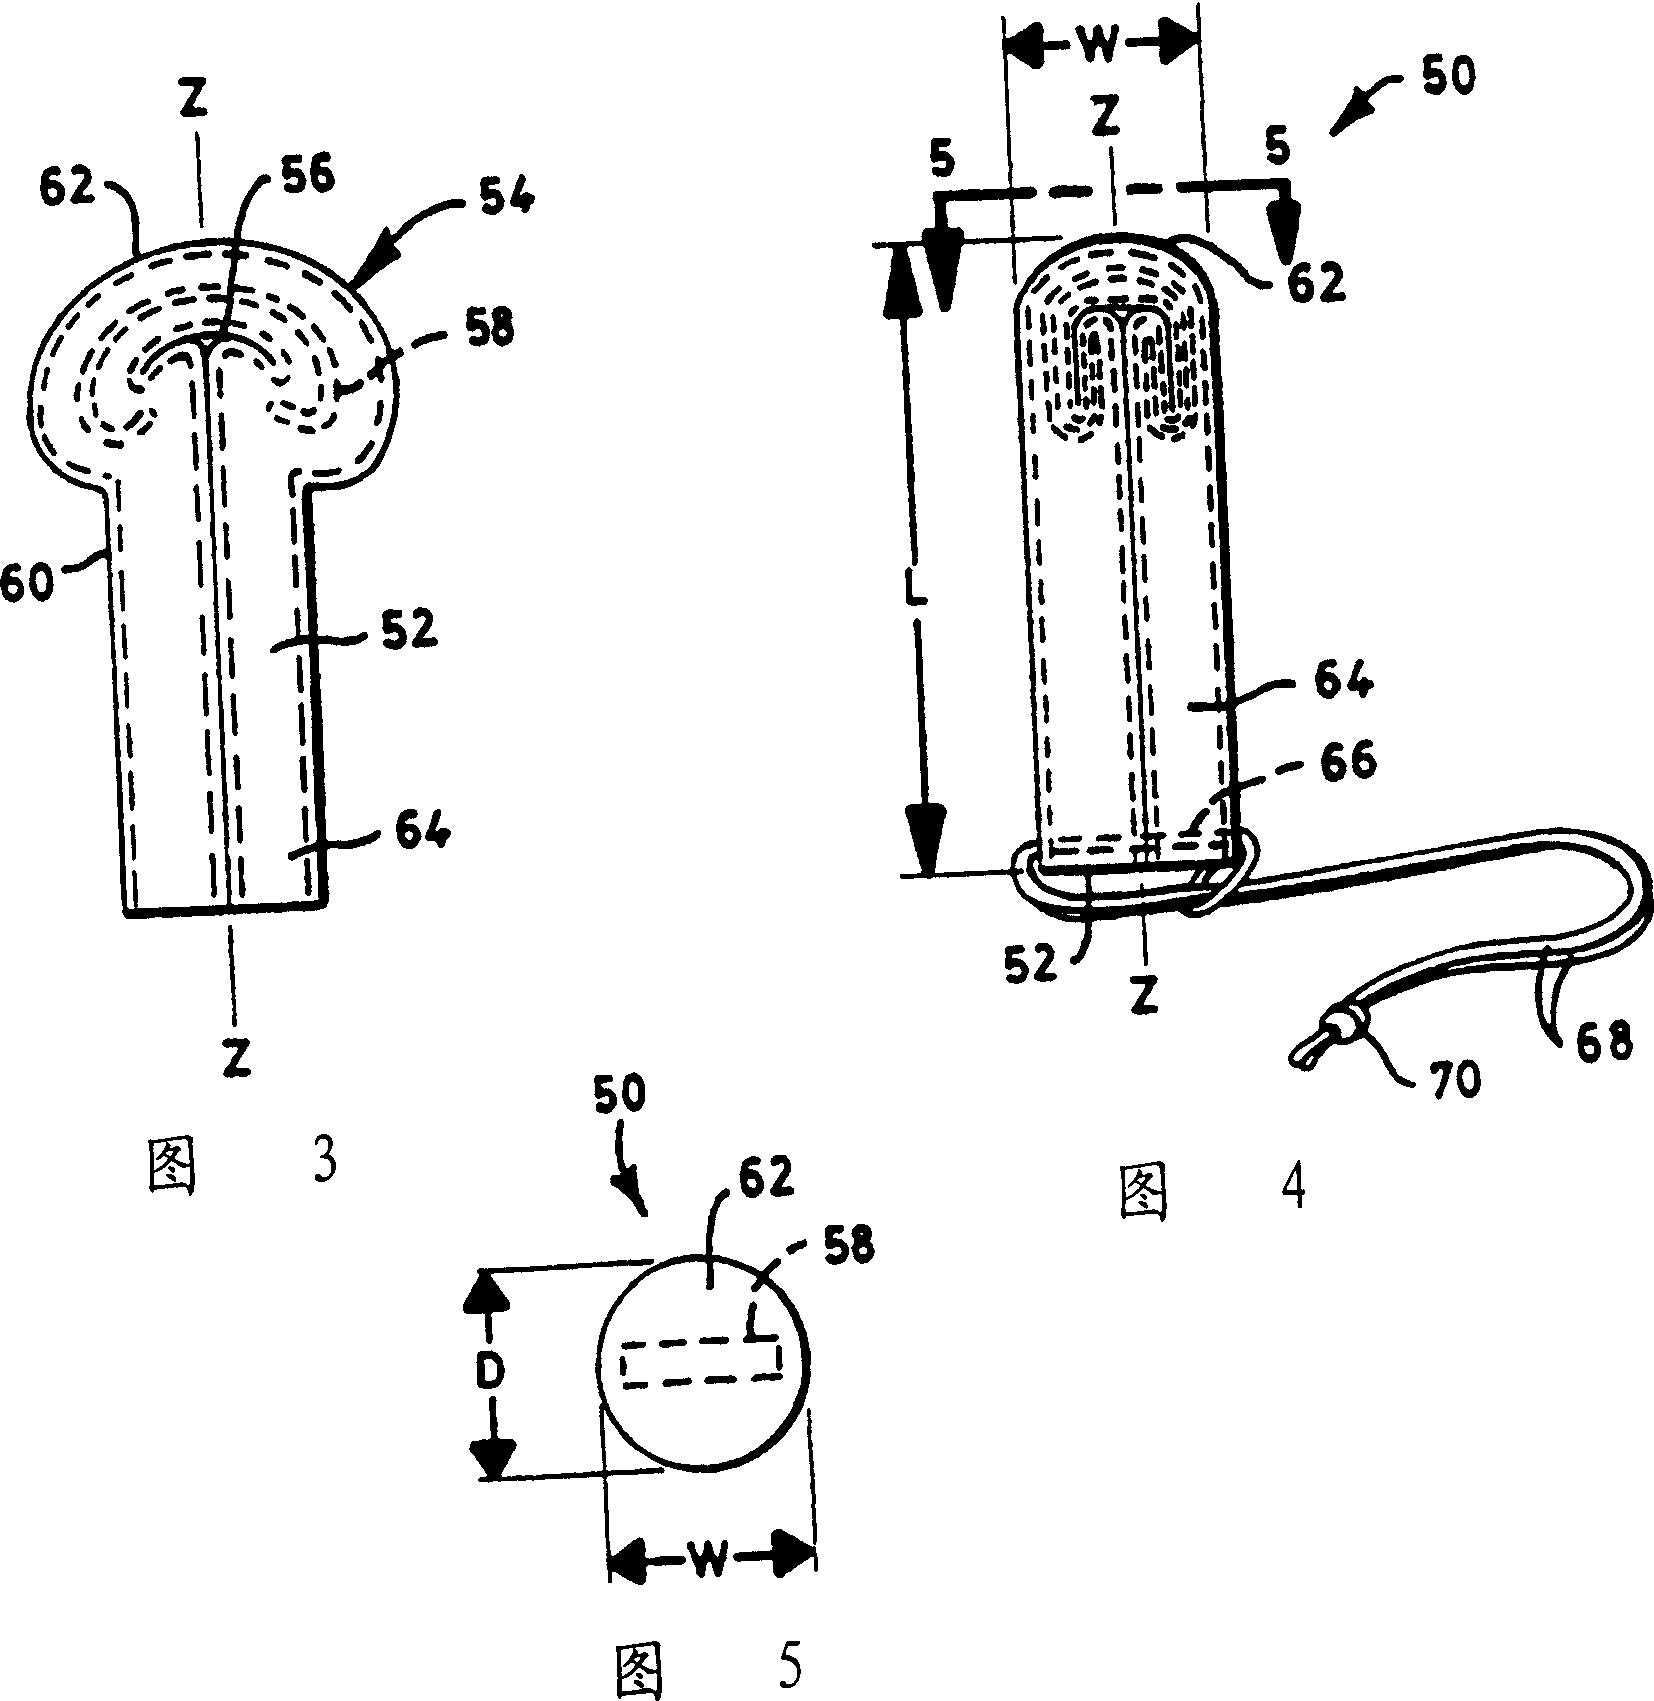 Method for alleviating female urinary incontinence